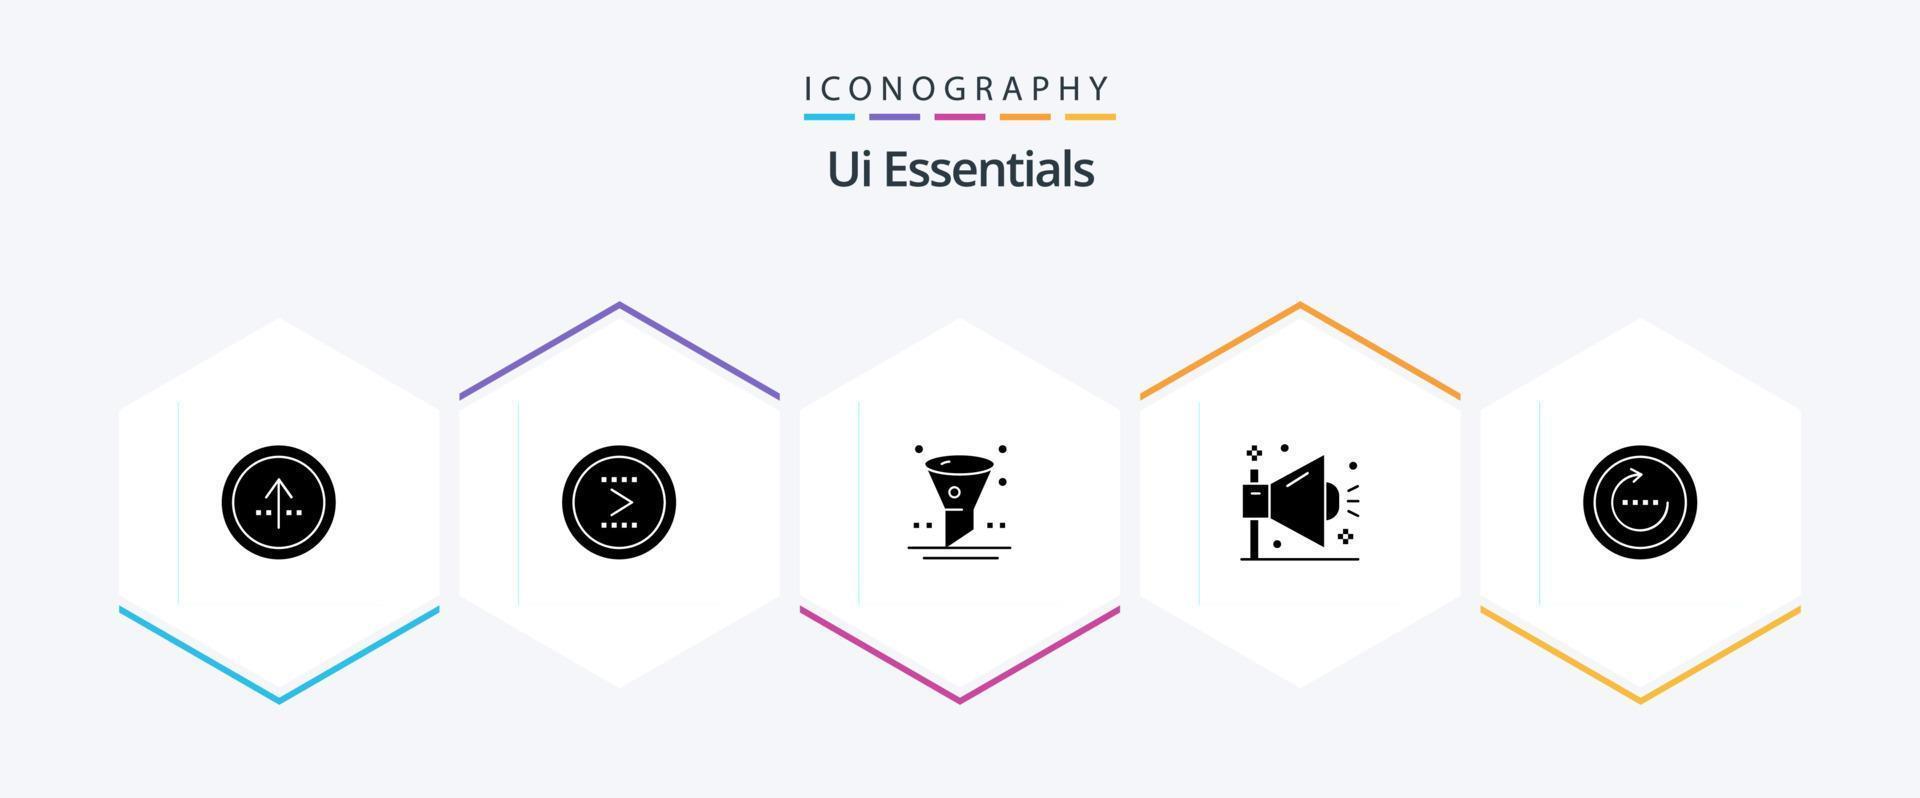 Ui Essentials 25 Glyph icon pack including seo. marketing. next. business. interface vector